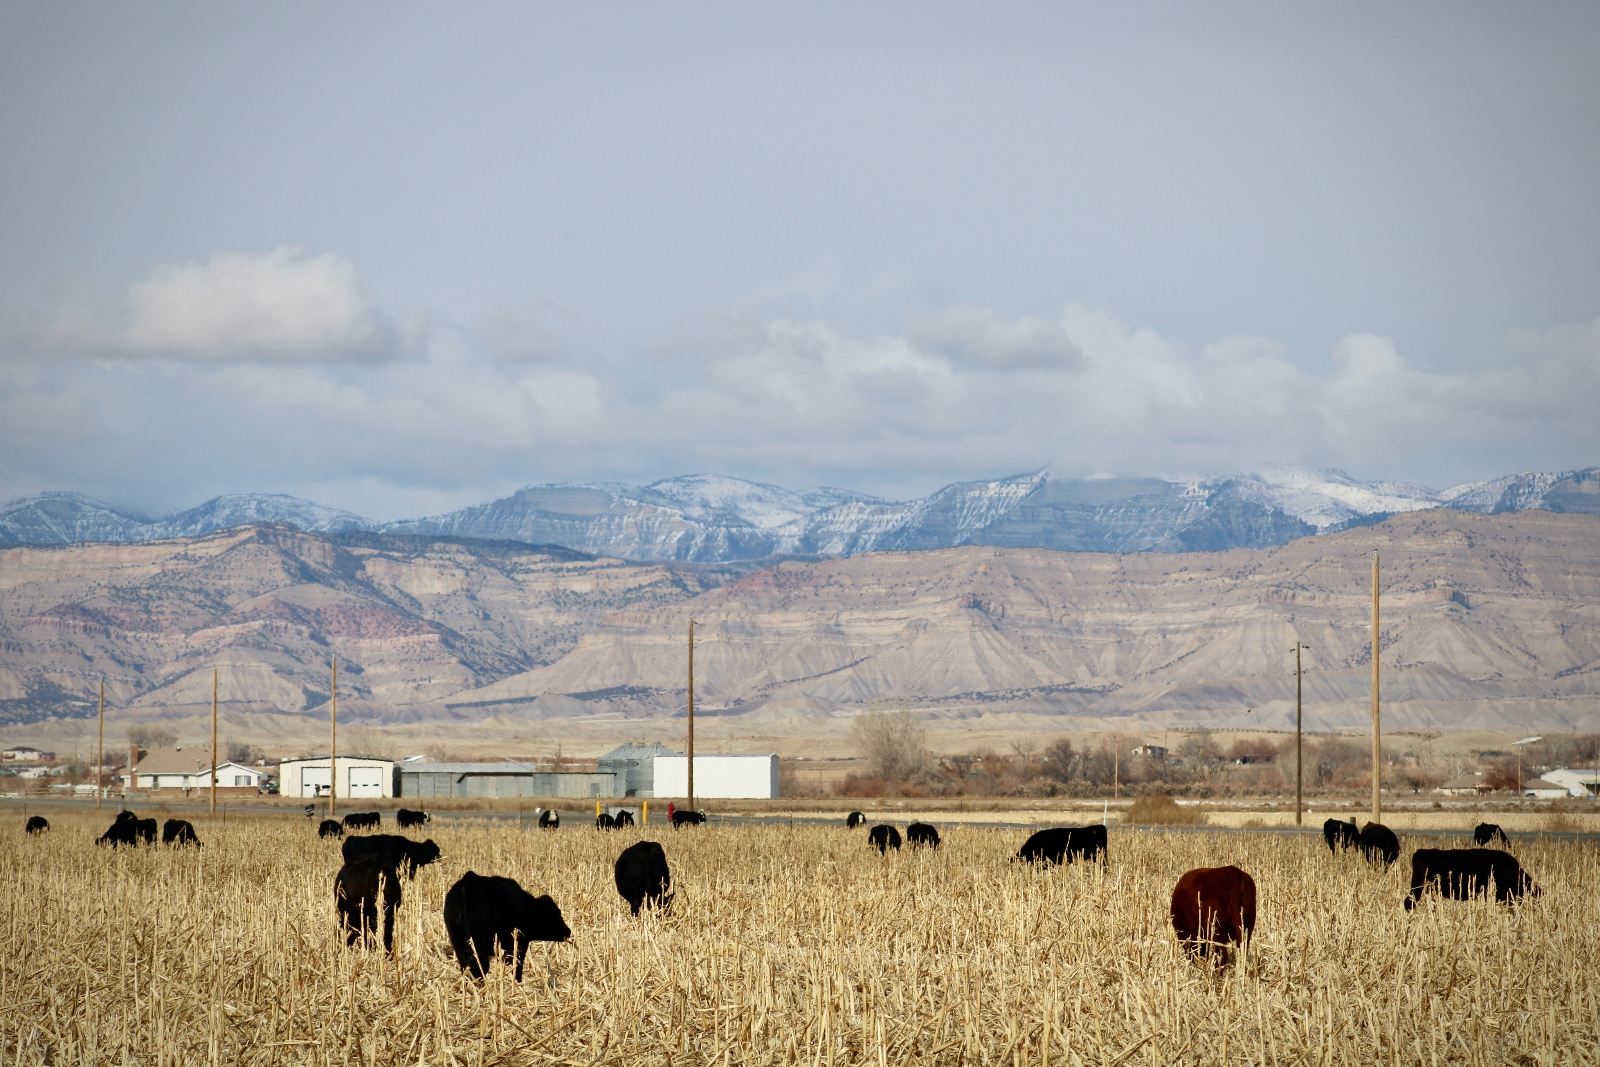 Black cows eat in a grassy field overlooked by mountains.